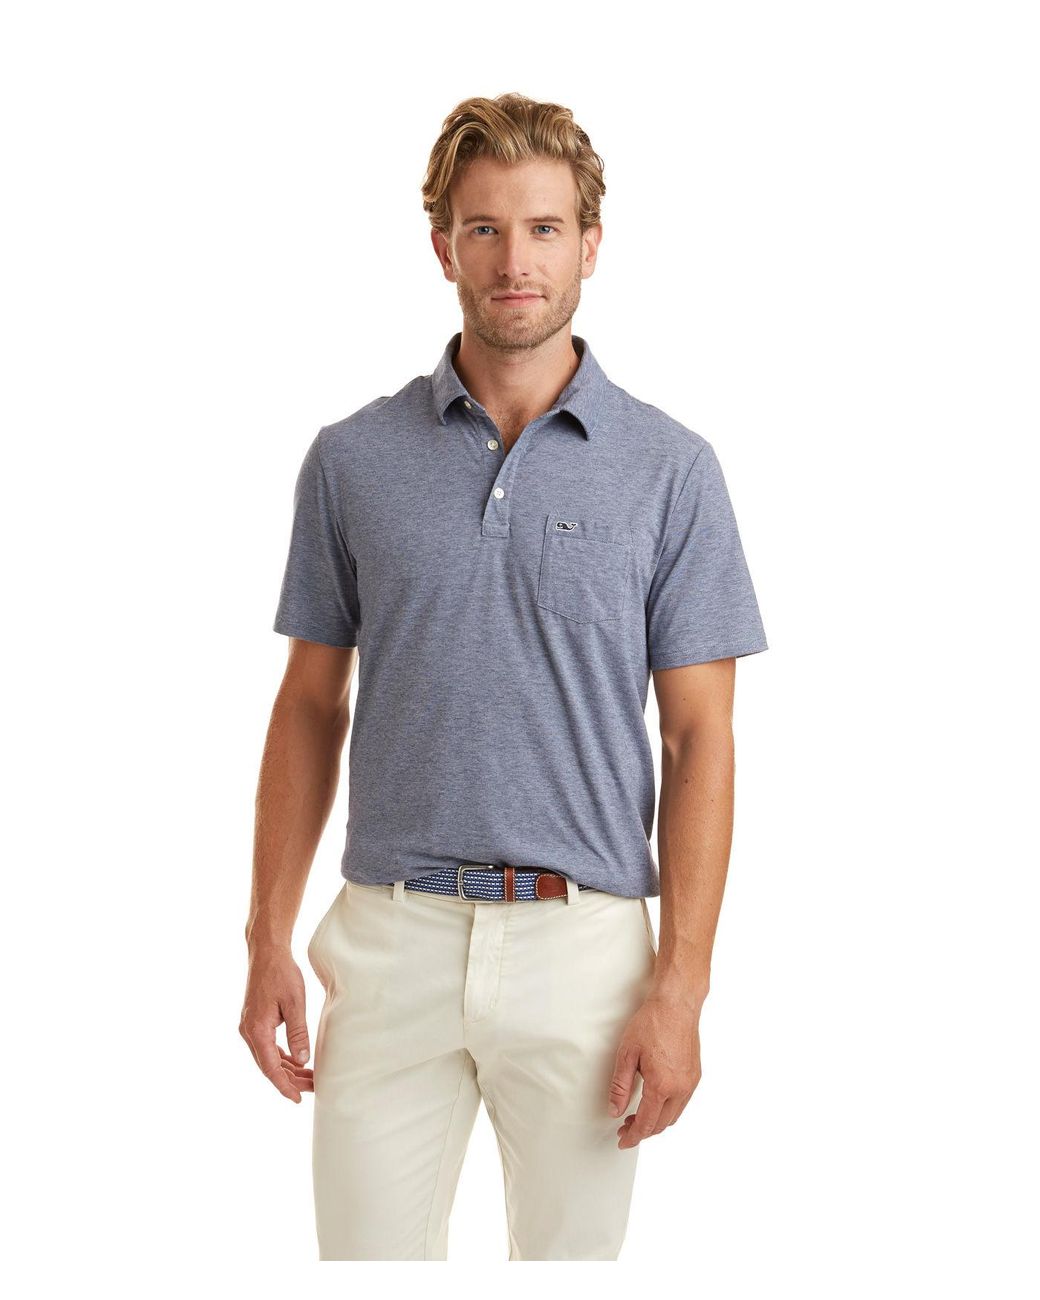 Vineyard Vines Cotton Solid Edgartown Polo Shirt in Blue for Men - Lyst